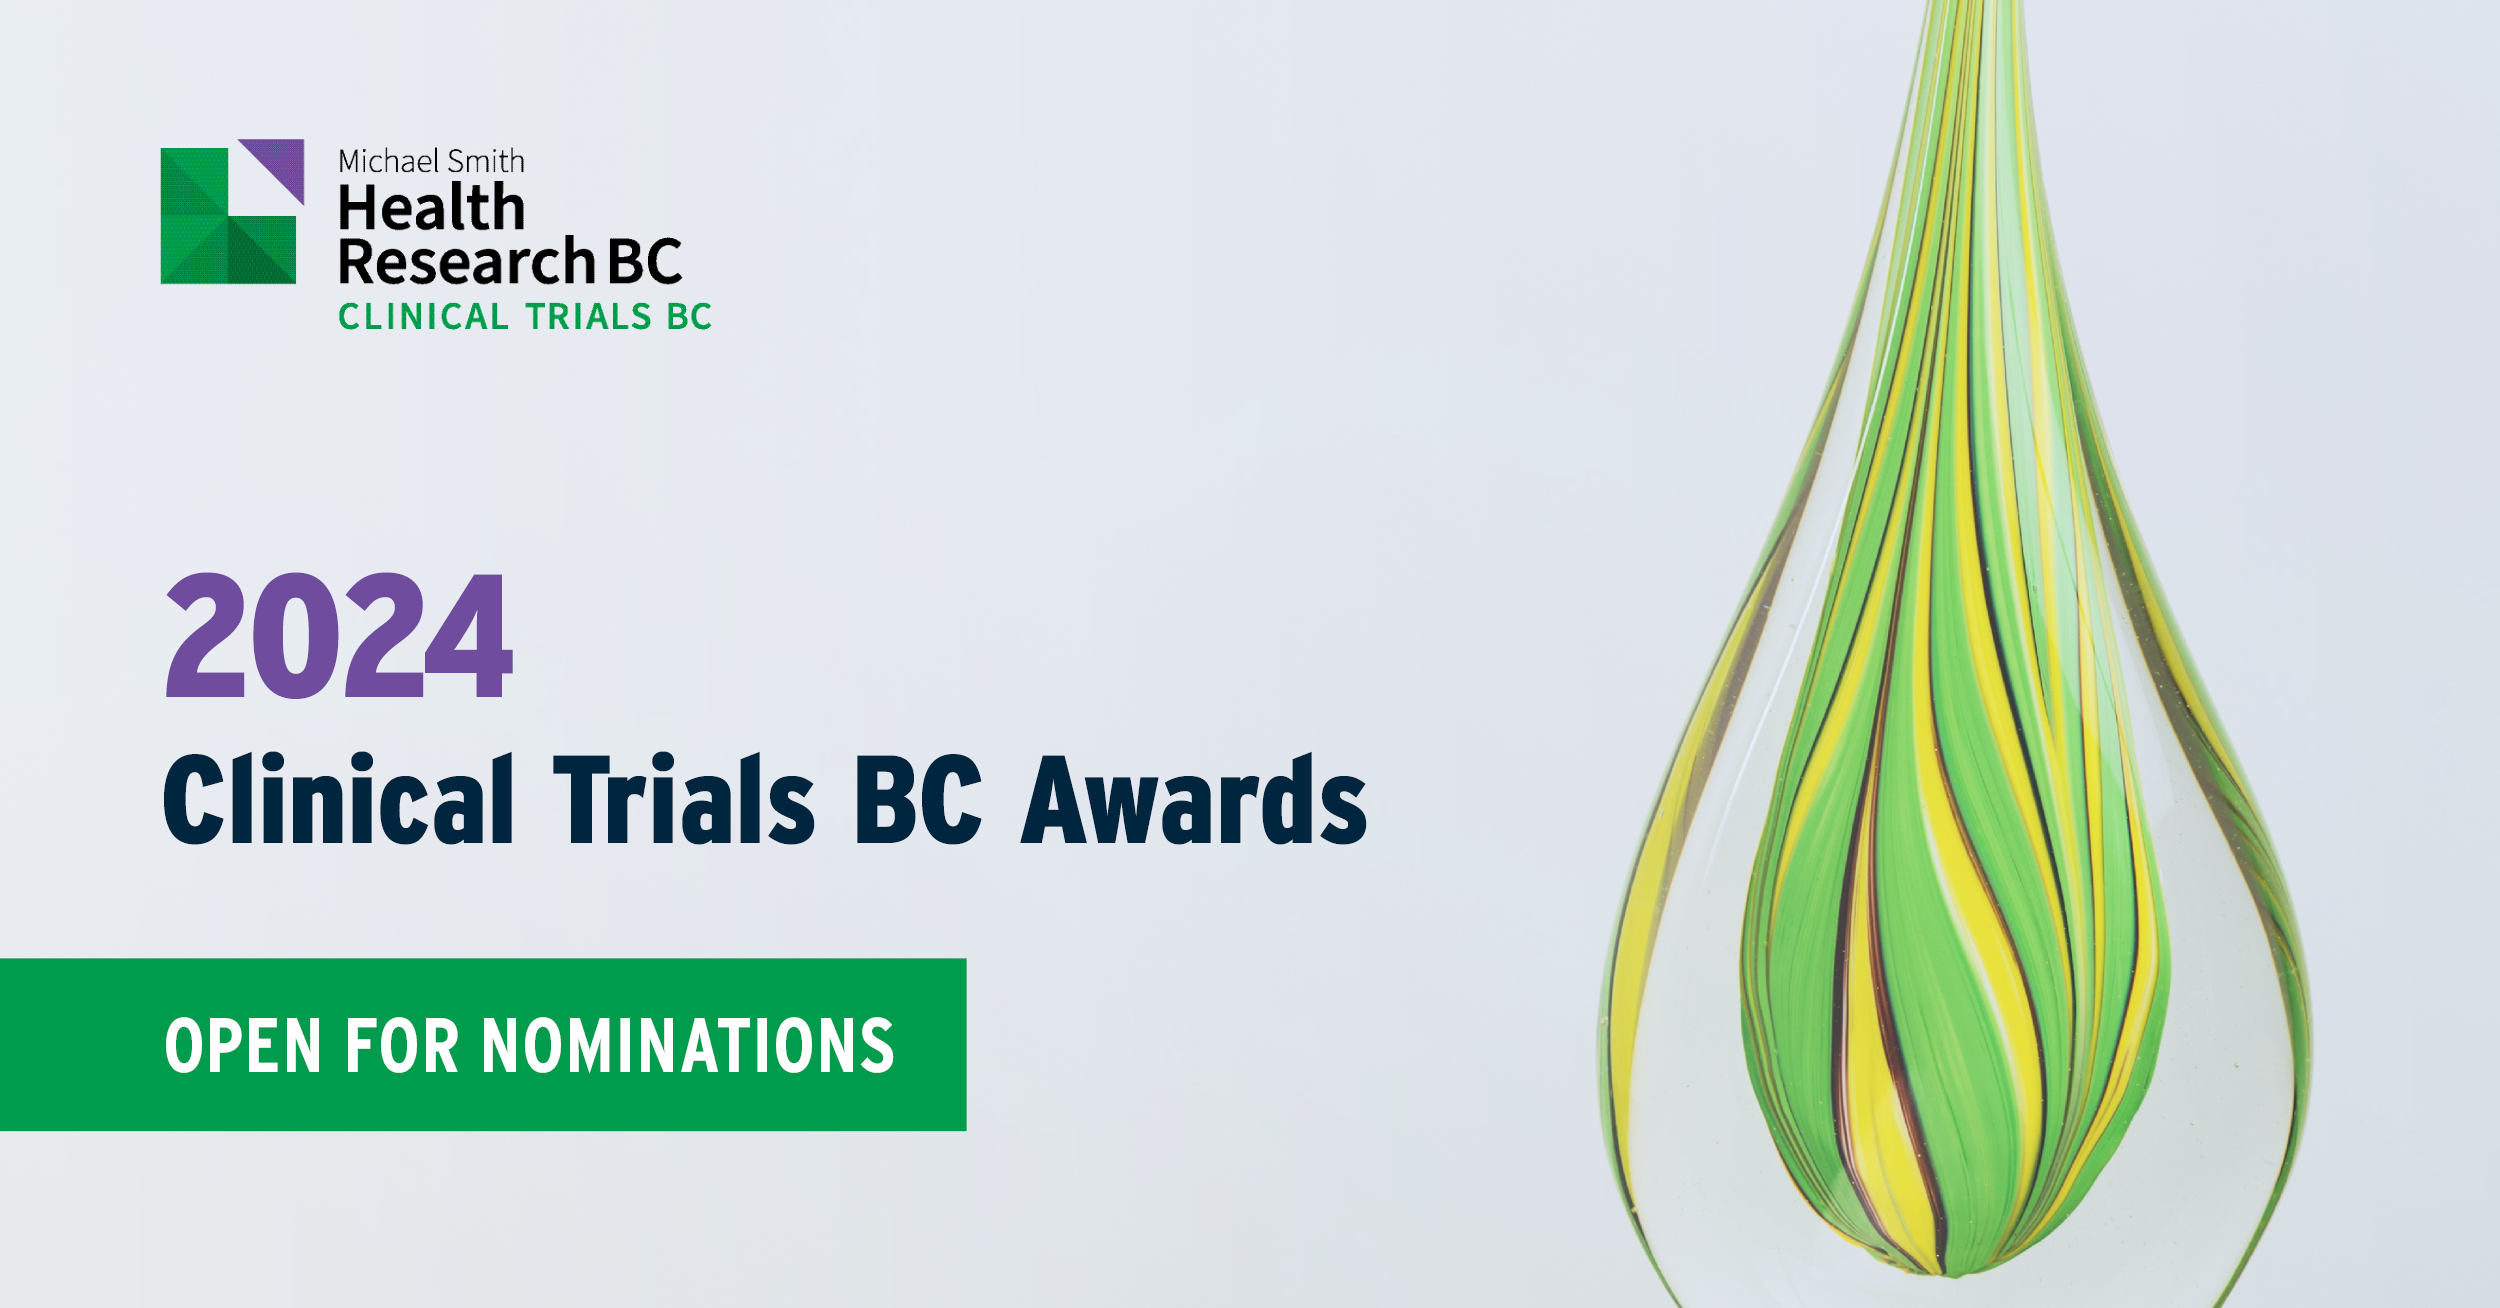 2024 Clinical Trials BC Awards now open for nominations